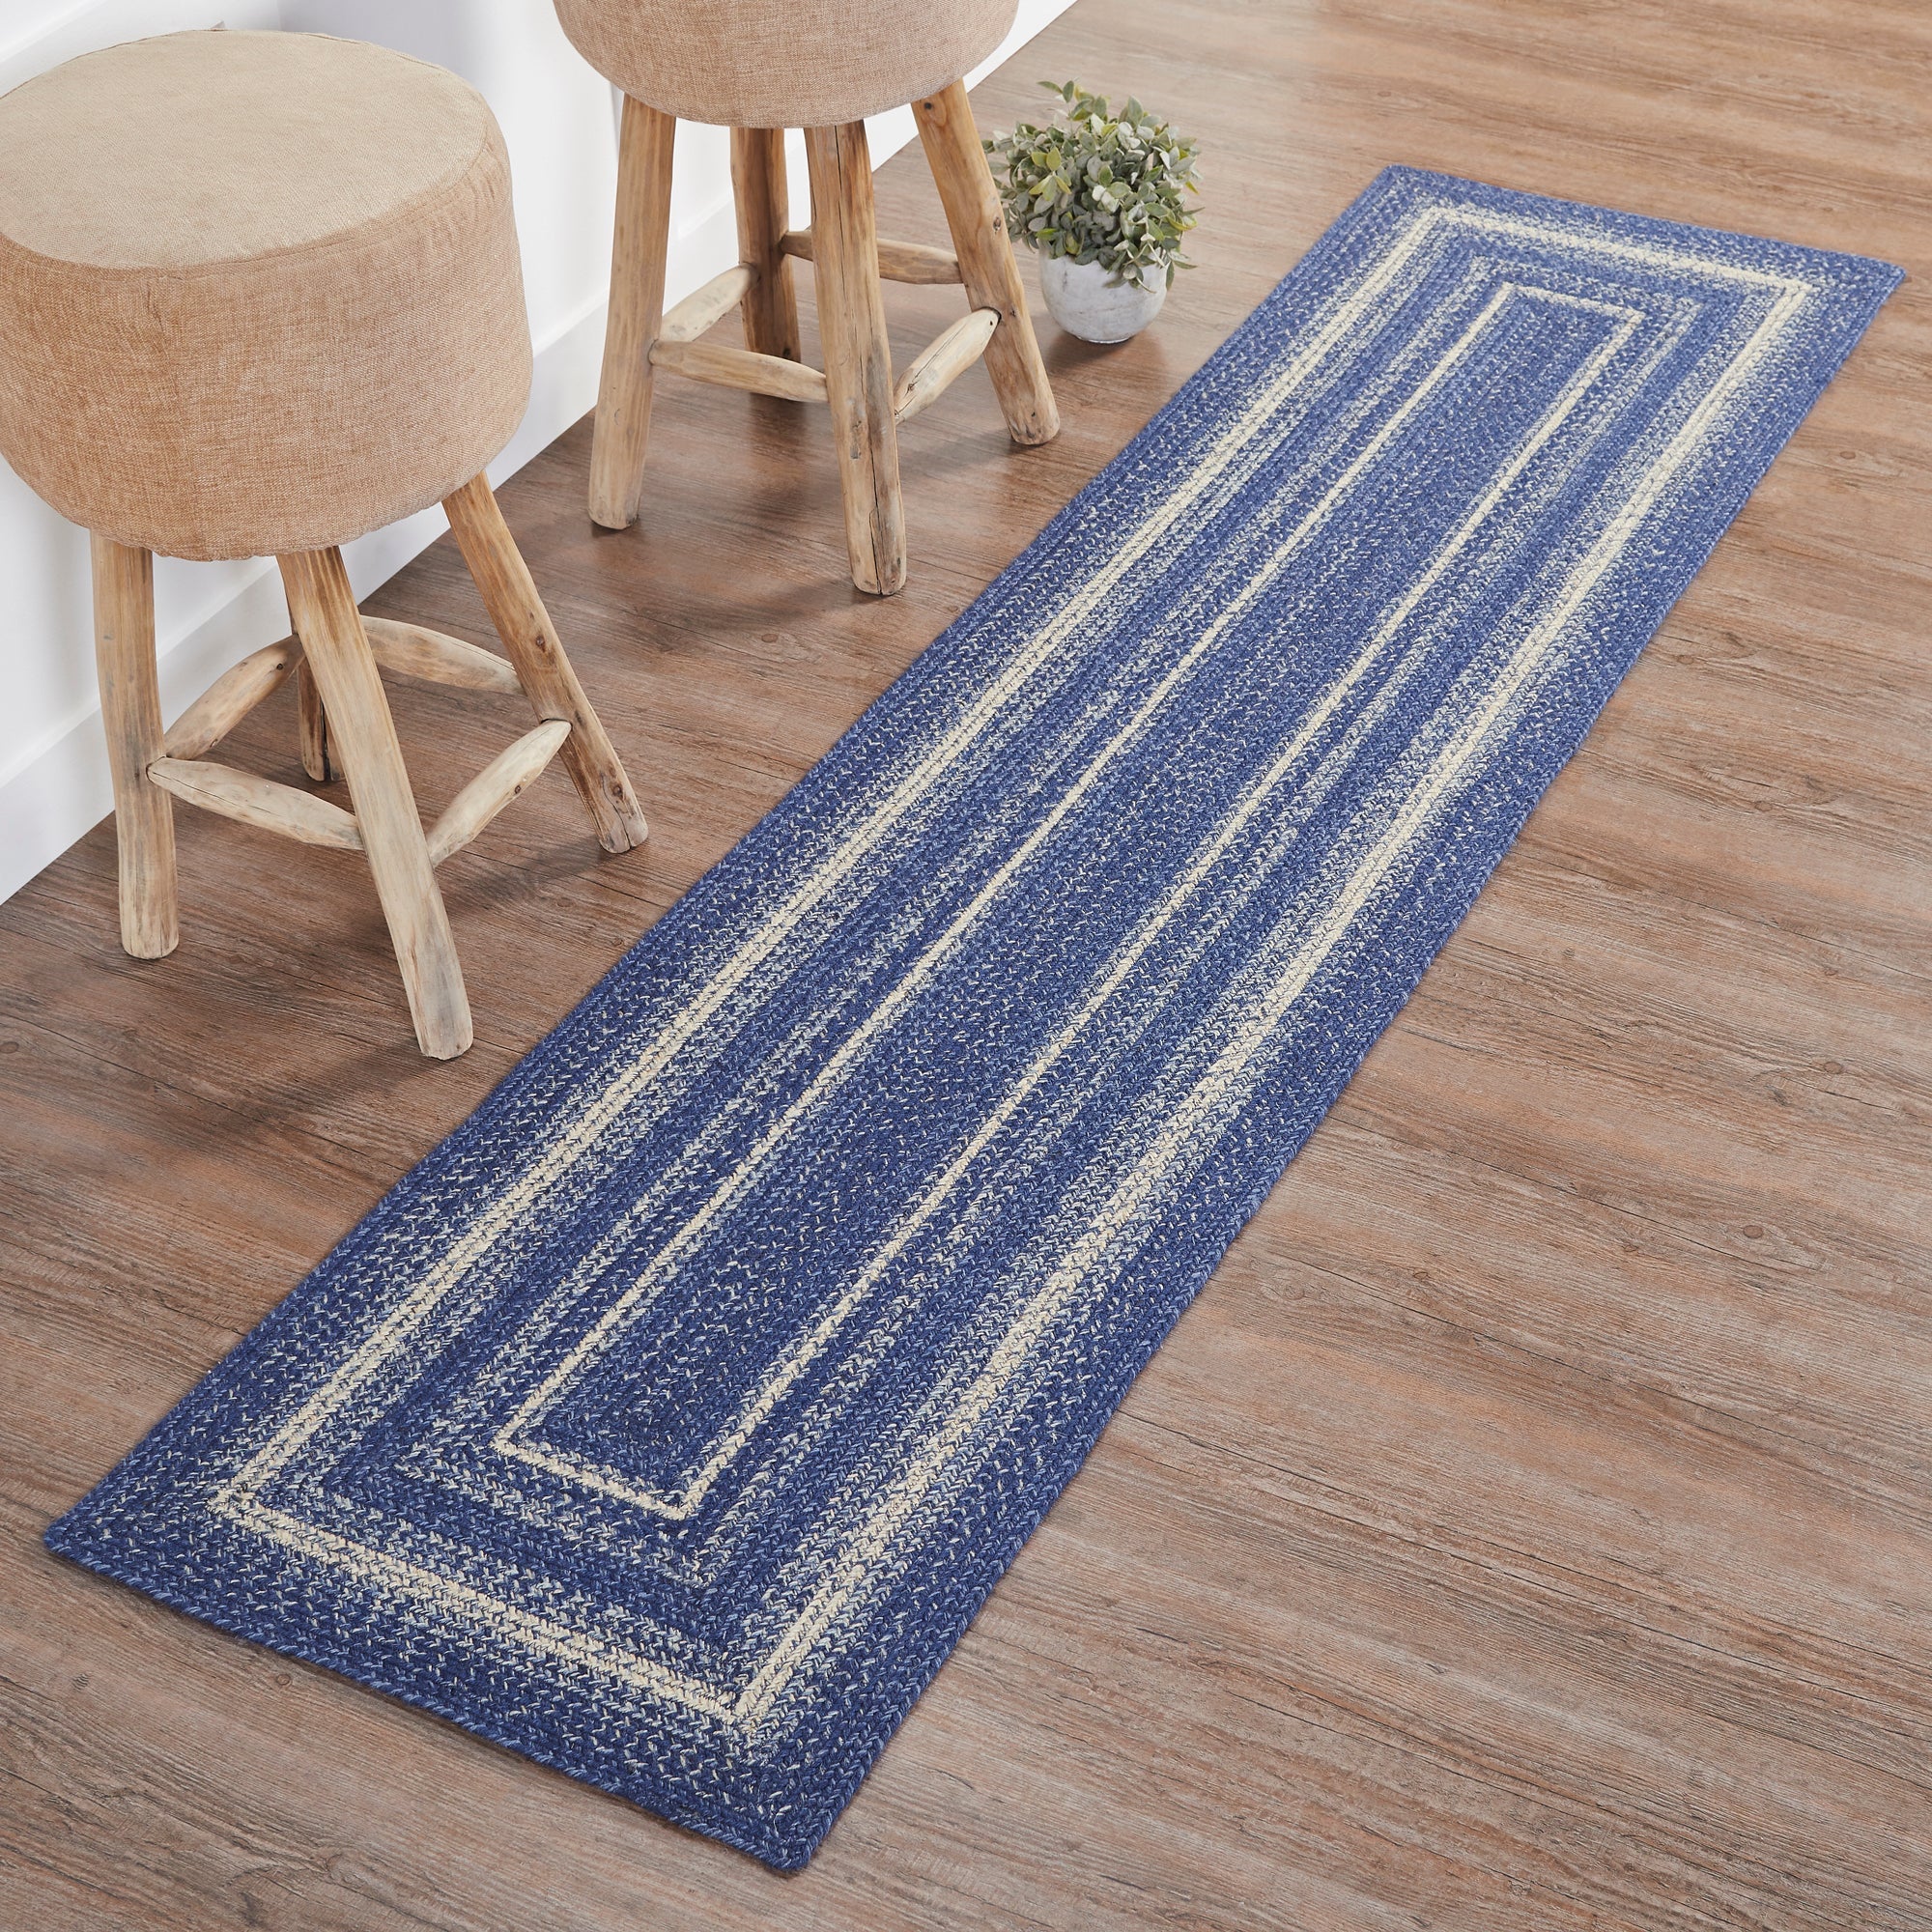 Great Falls Jute Braided Rug/Runner Rect. with Rug Pad 2'x8' VHC Brands